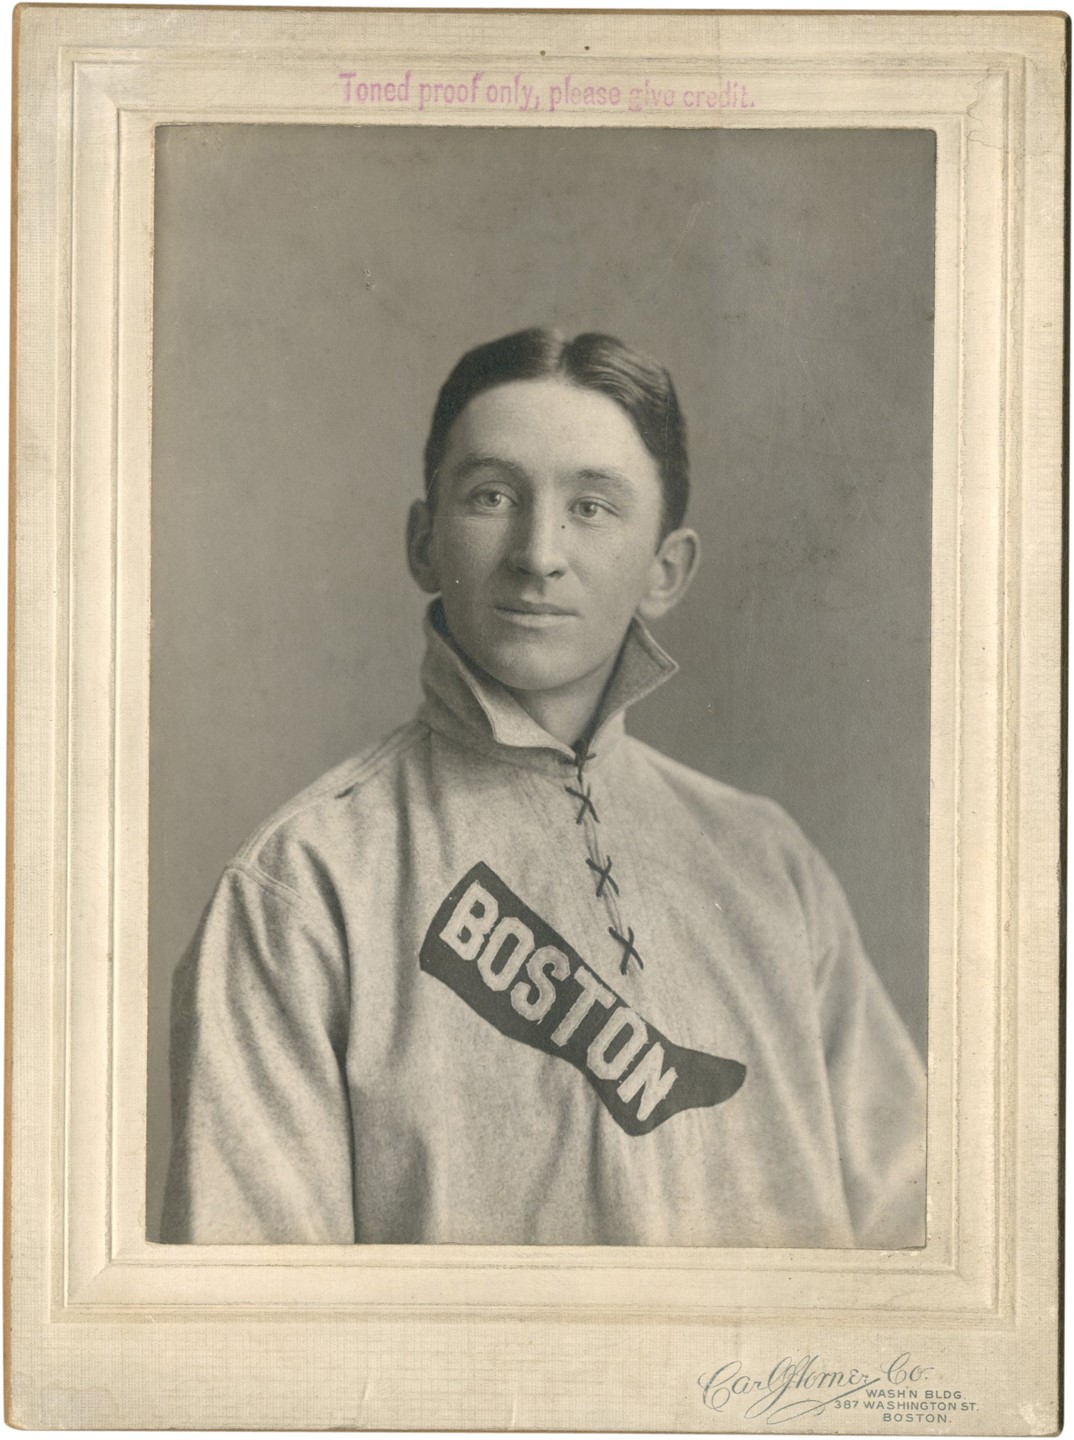 - Pat Donahue Boston Red Sox Photograph by Carl Horner (Used For 1909 T204 Ramly Jiggs Donahue Card)